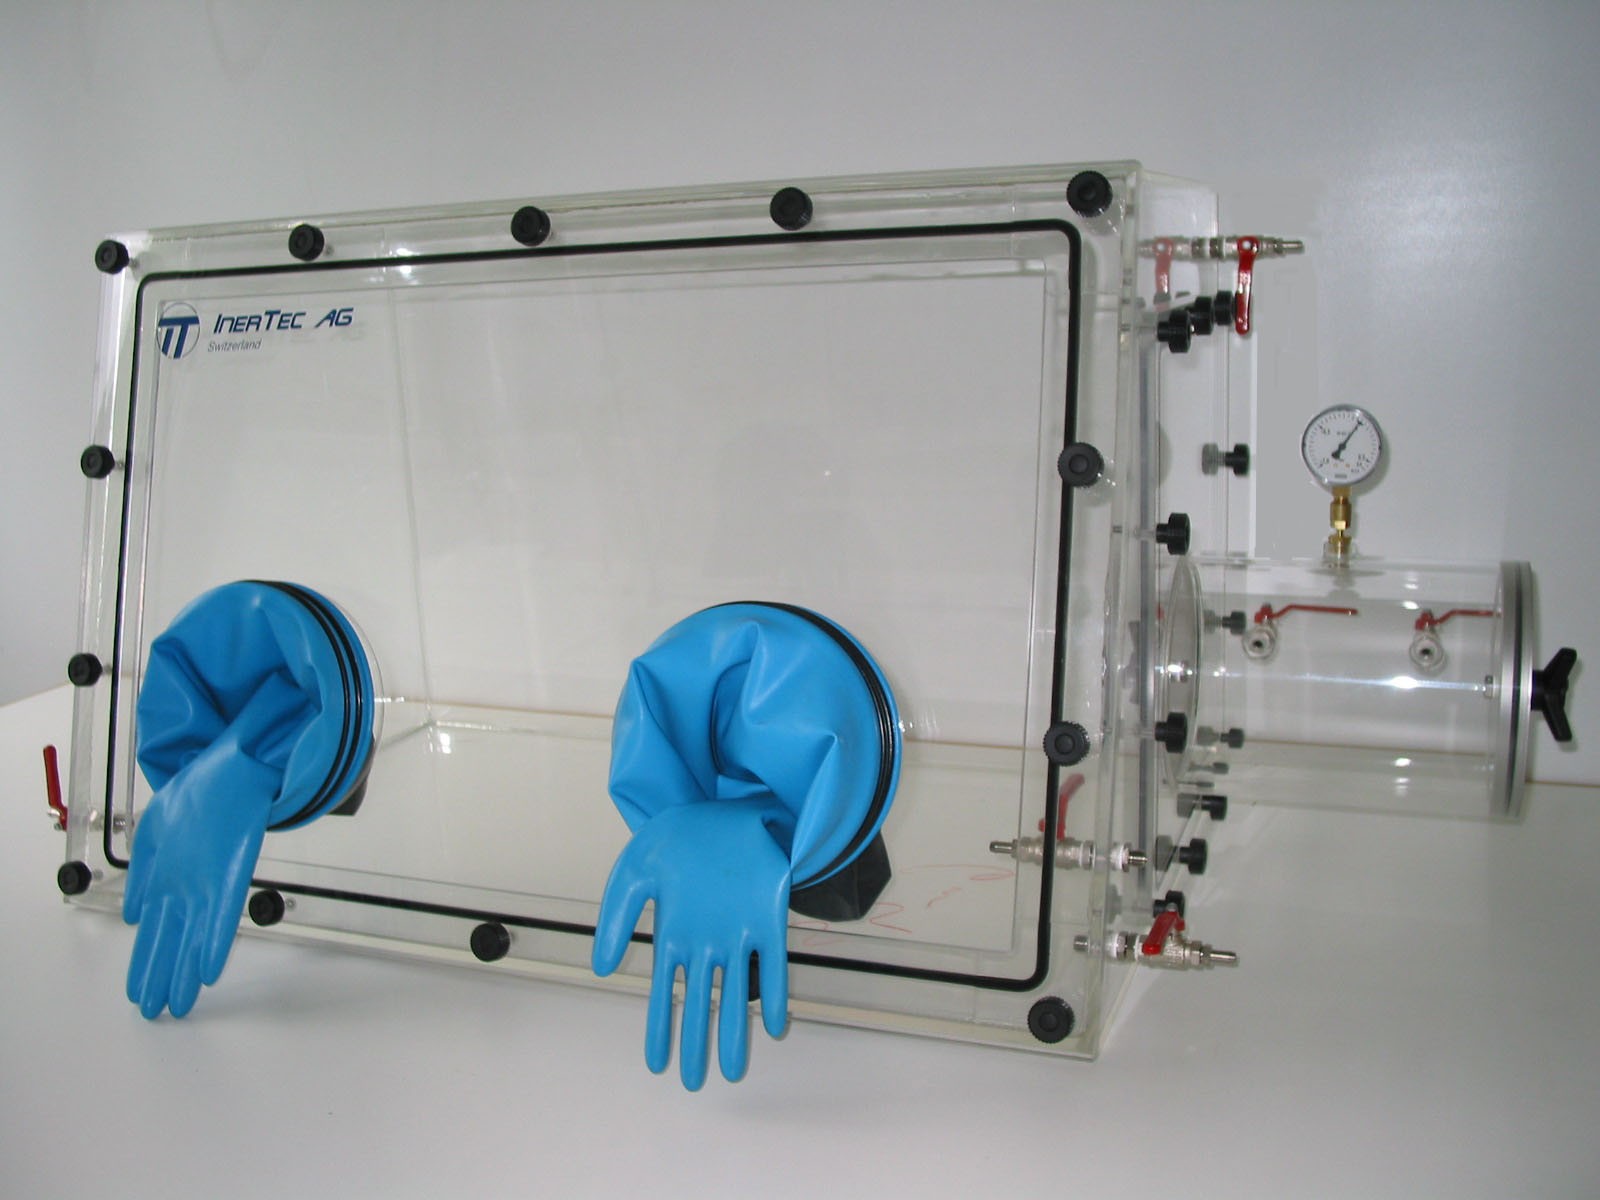 Glovebox made of acrylic&gt; Gas filling: automatic flushing with pressure control, front design: removable, side design: round vacuum lock, control: oxygen and humidity regulator with data logger